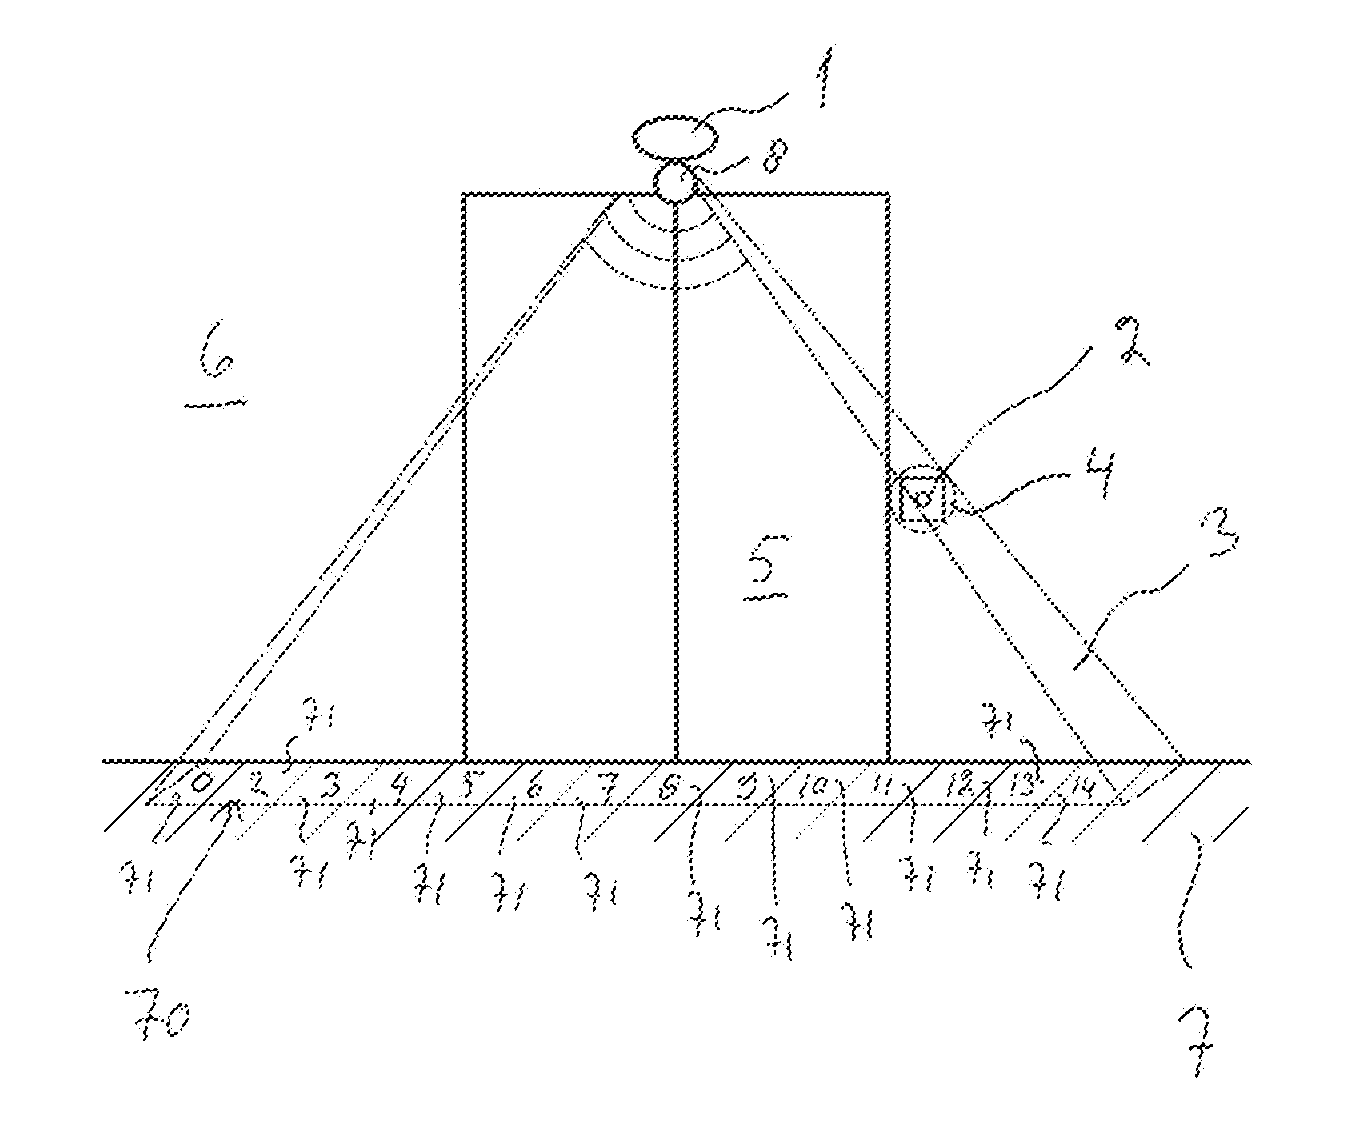 Call-giving system of an elevator and method for giving elevator calls in the call-giving system of an elevator